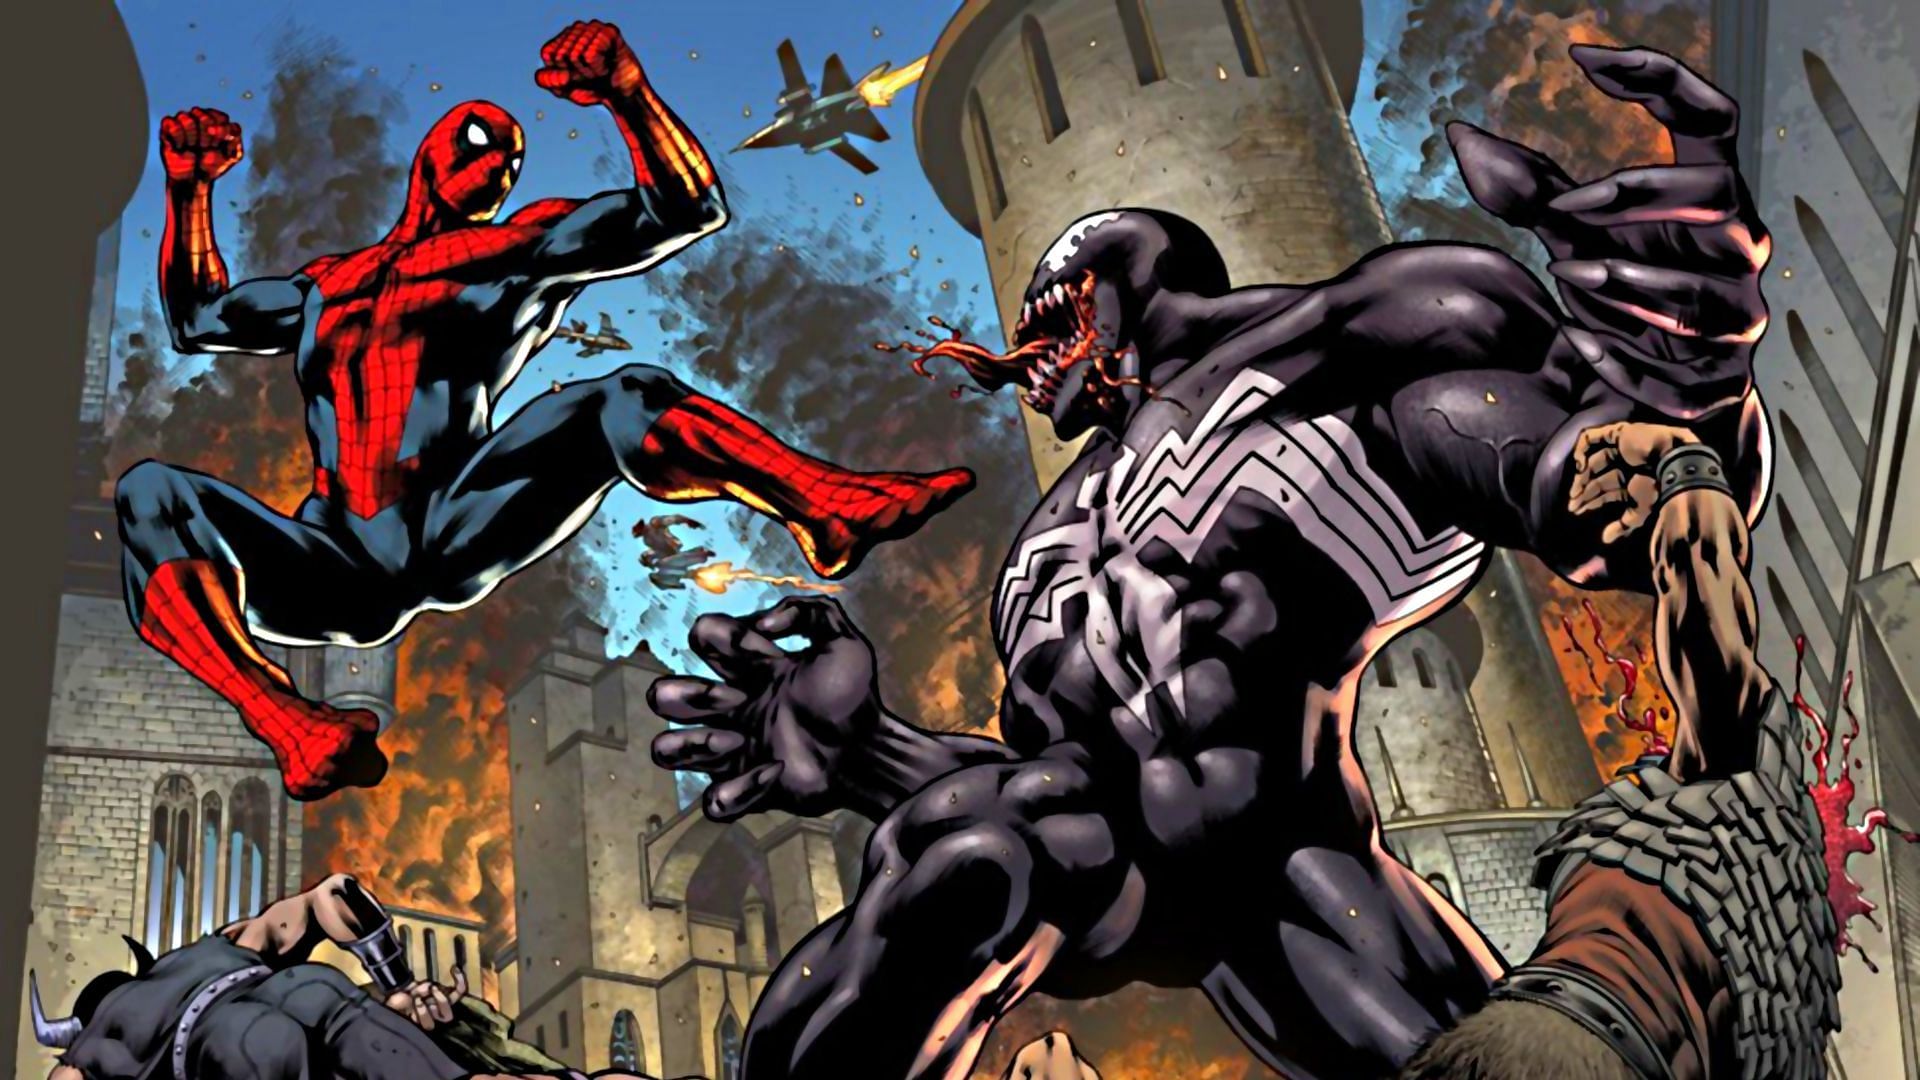 The clash between Spider-Man and Venom in The Amazing Spider-Man stands as one of the most legendary battles in Marvel Comics. (Image Via Marvel)